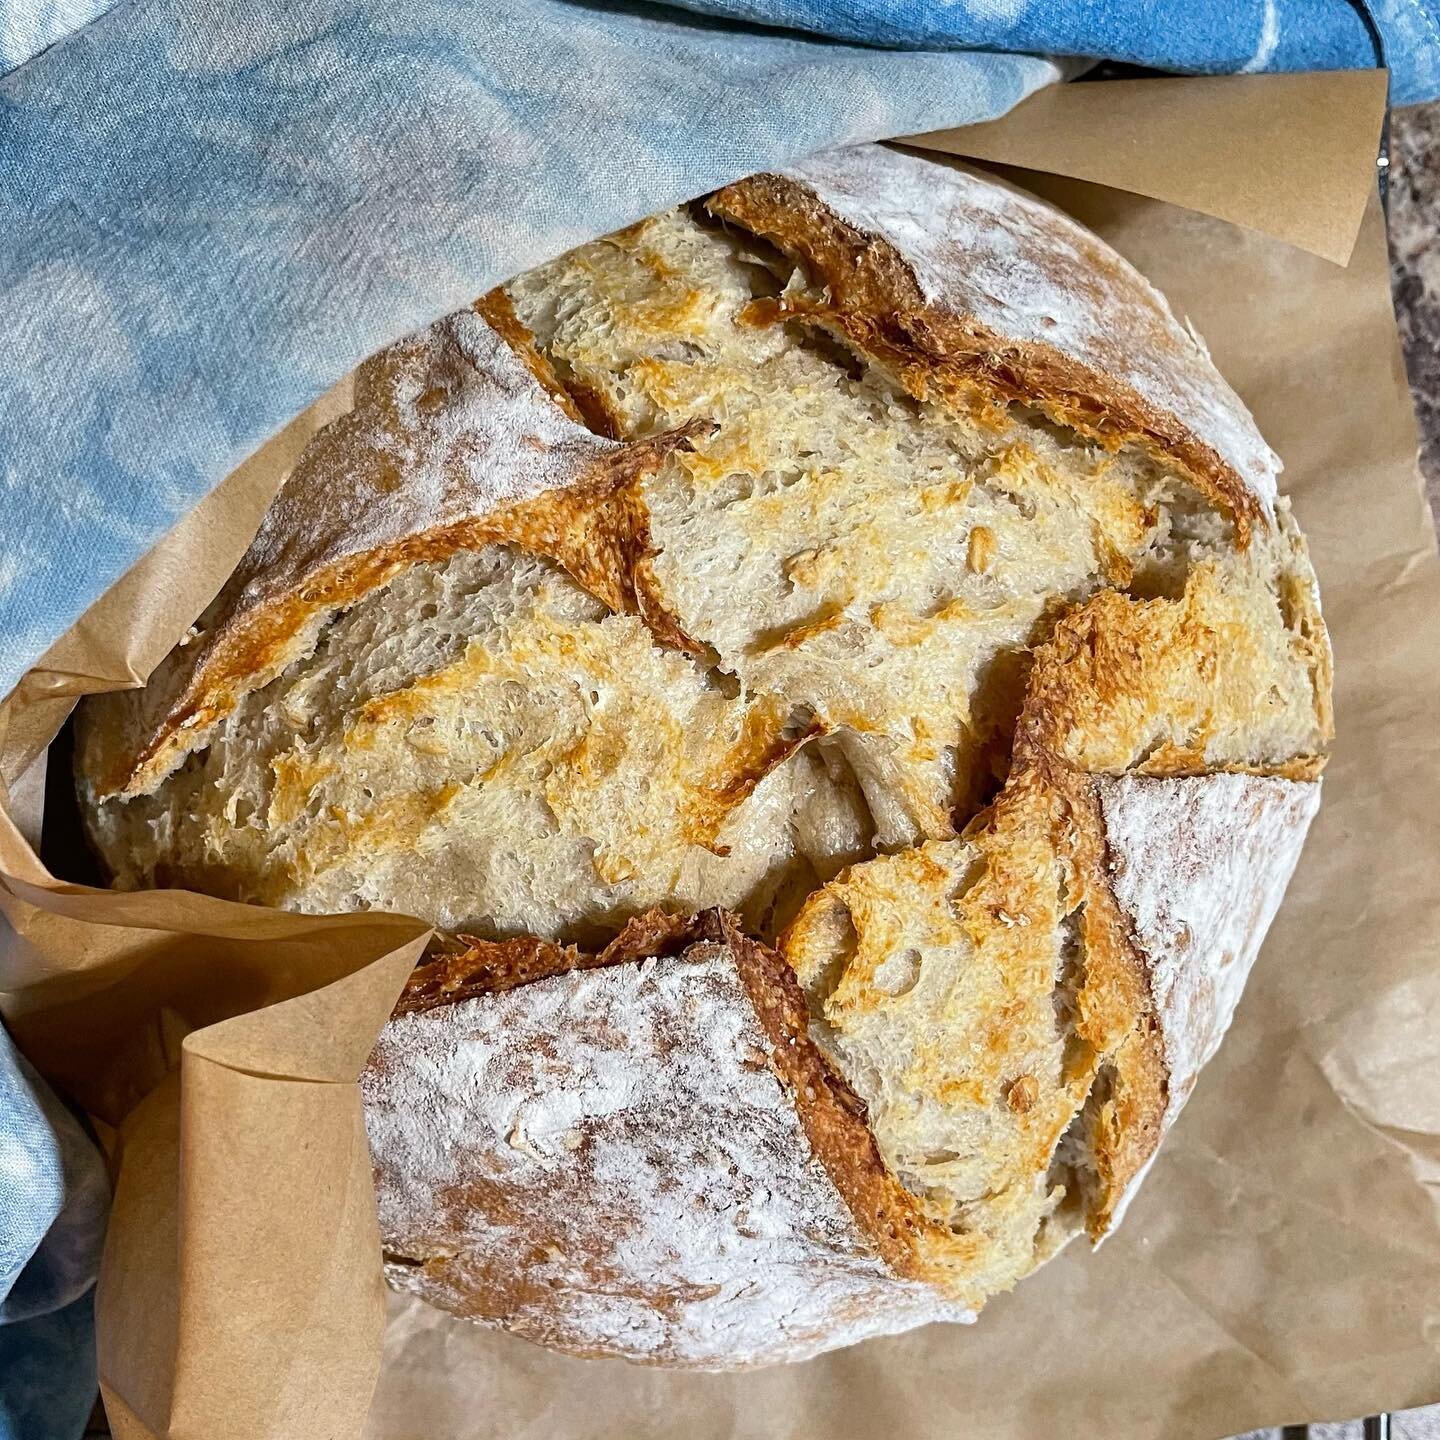 Sourdough is so resilient. I forgot I had this loaf shaped on the counter, got ready for bed, and oh dear. So, I reshaped it, popped in the hot oven and pulled it out at midnight. It&rsquo;s the loaf I made from the dried sourdough starter I tested l